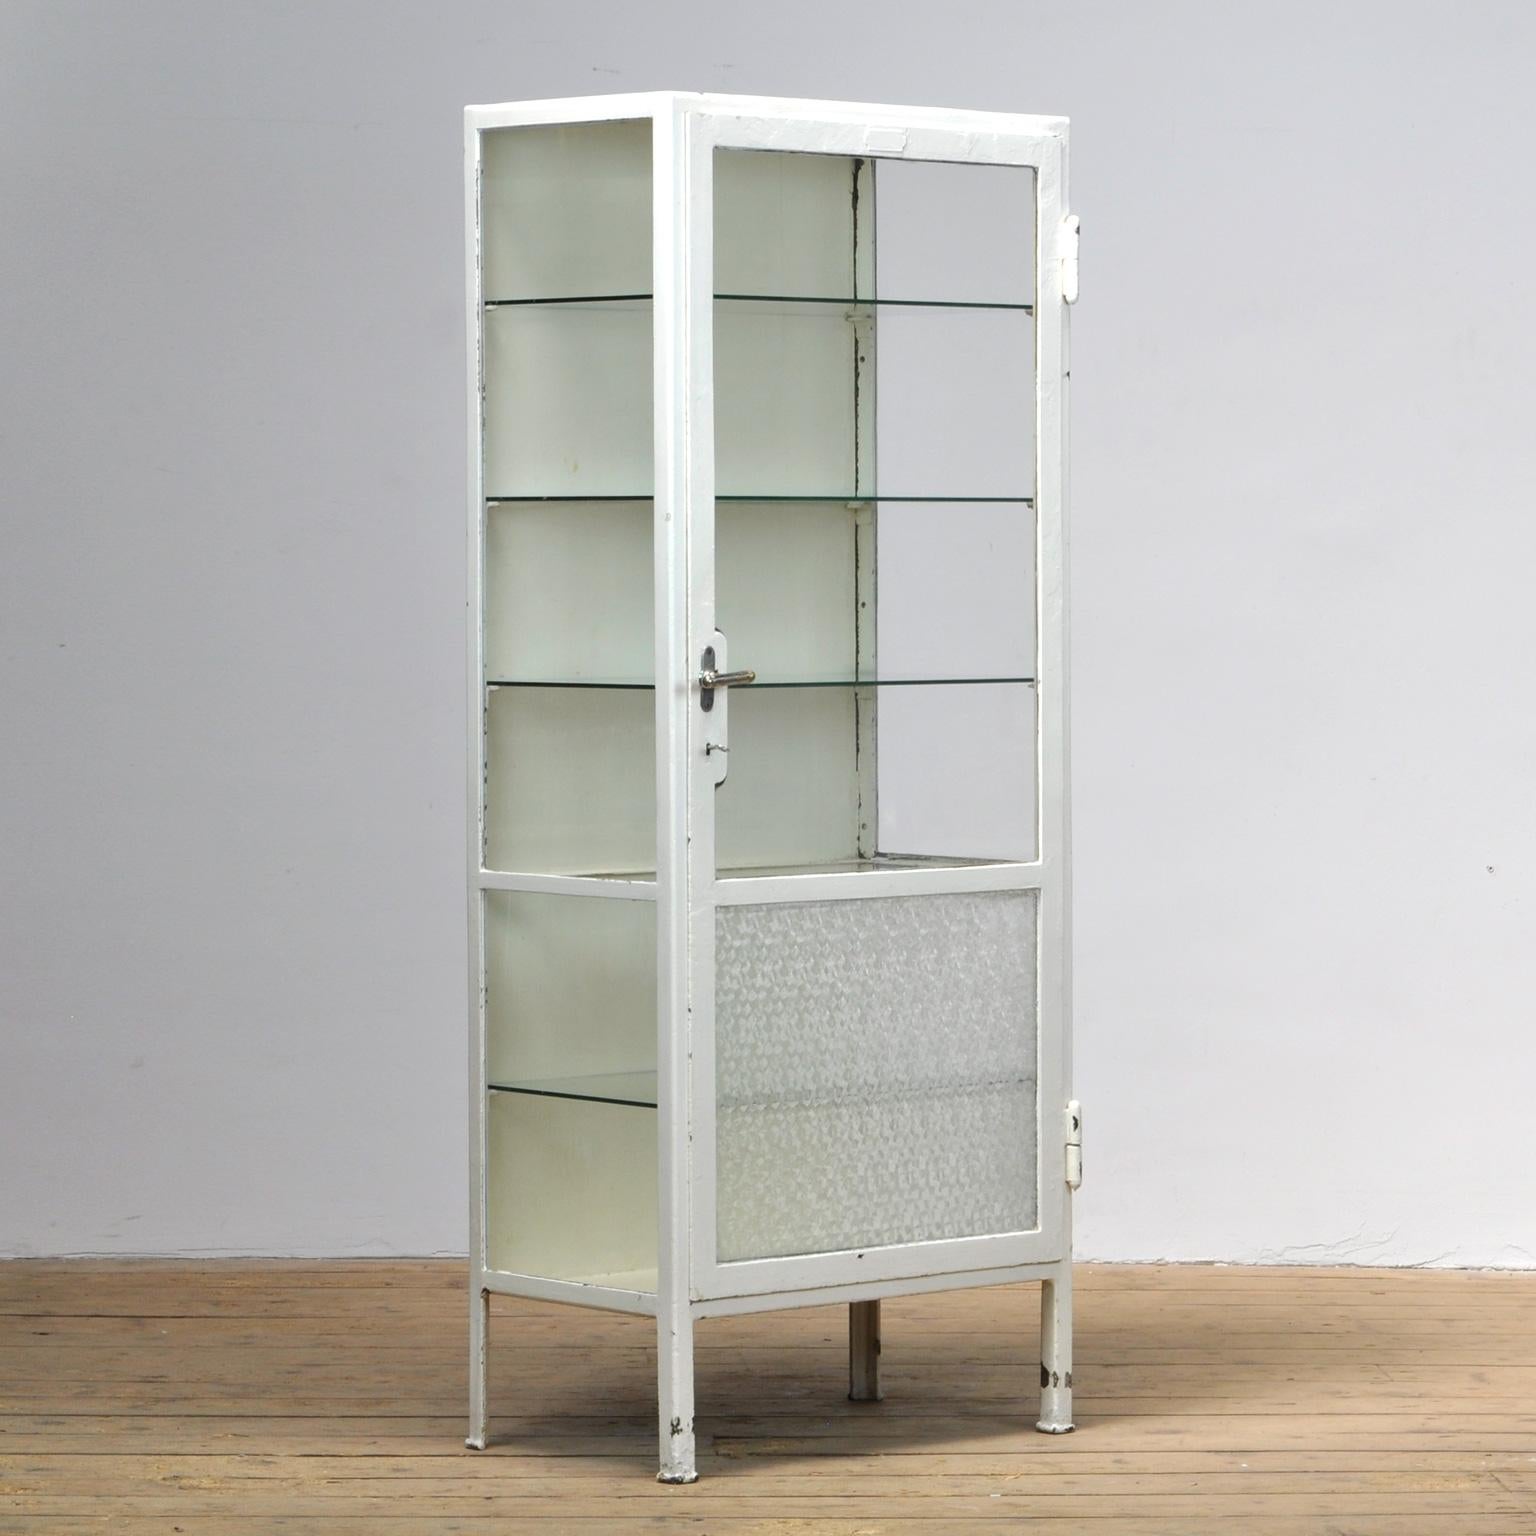 This medicine cabinet was produced in the 1930s in Hungary. The cabinet is made from thick steel and glass. It features five (new) glass shelves.